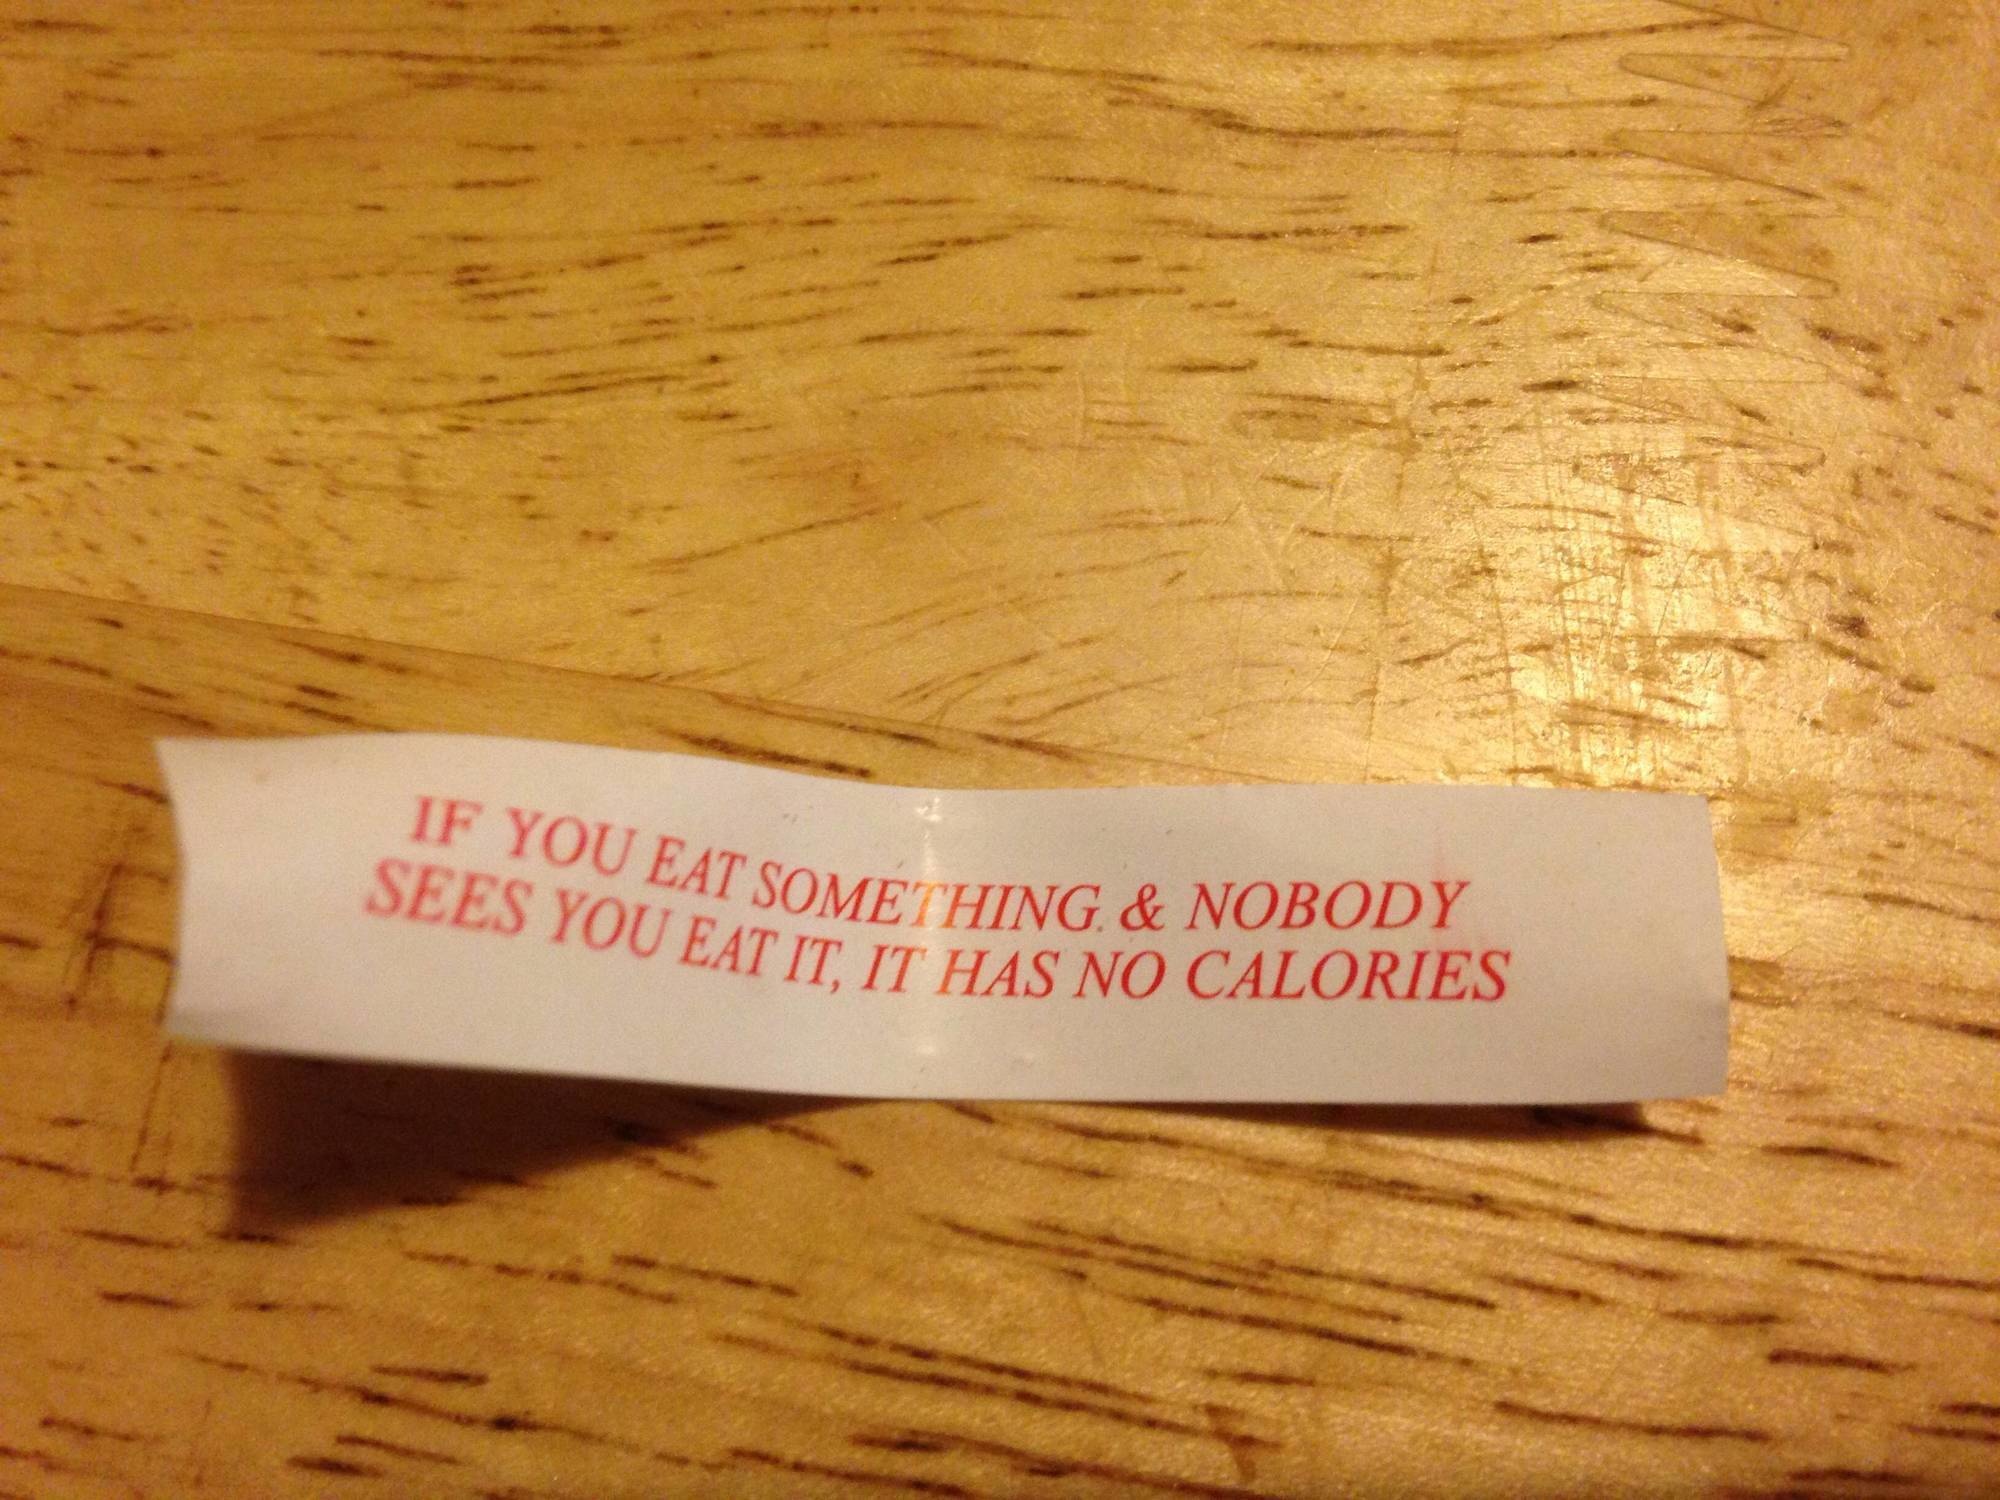 funny fortune cookies - If You Eat Somethin Sees You Eat It, It H Something & Nobody Latit, It Has No Calories